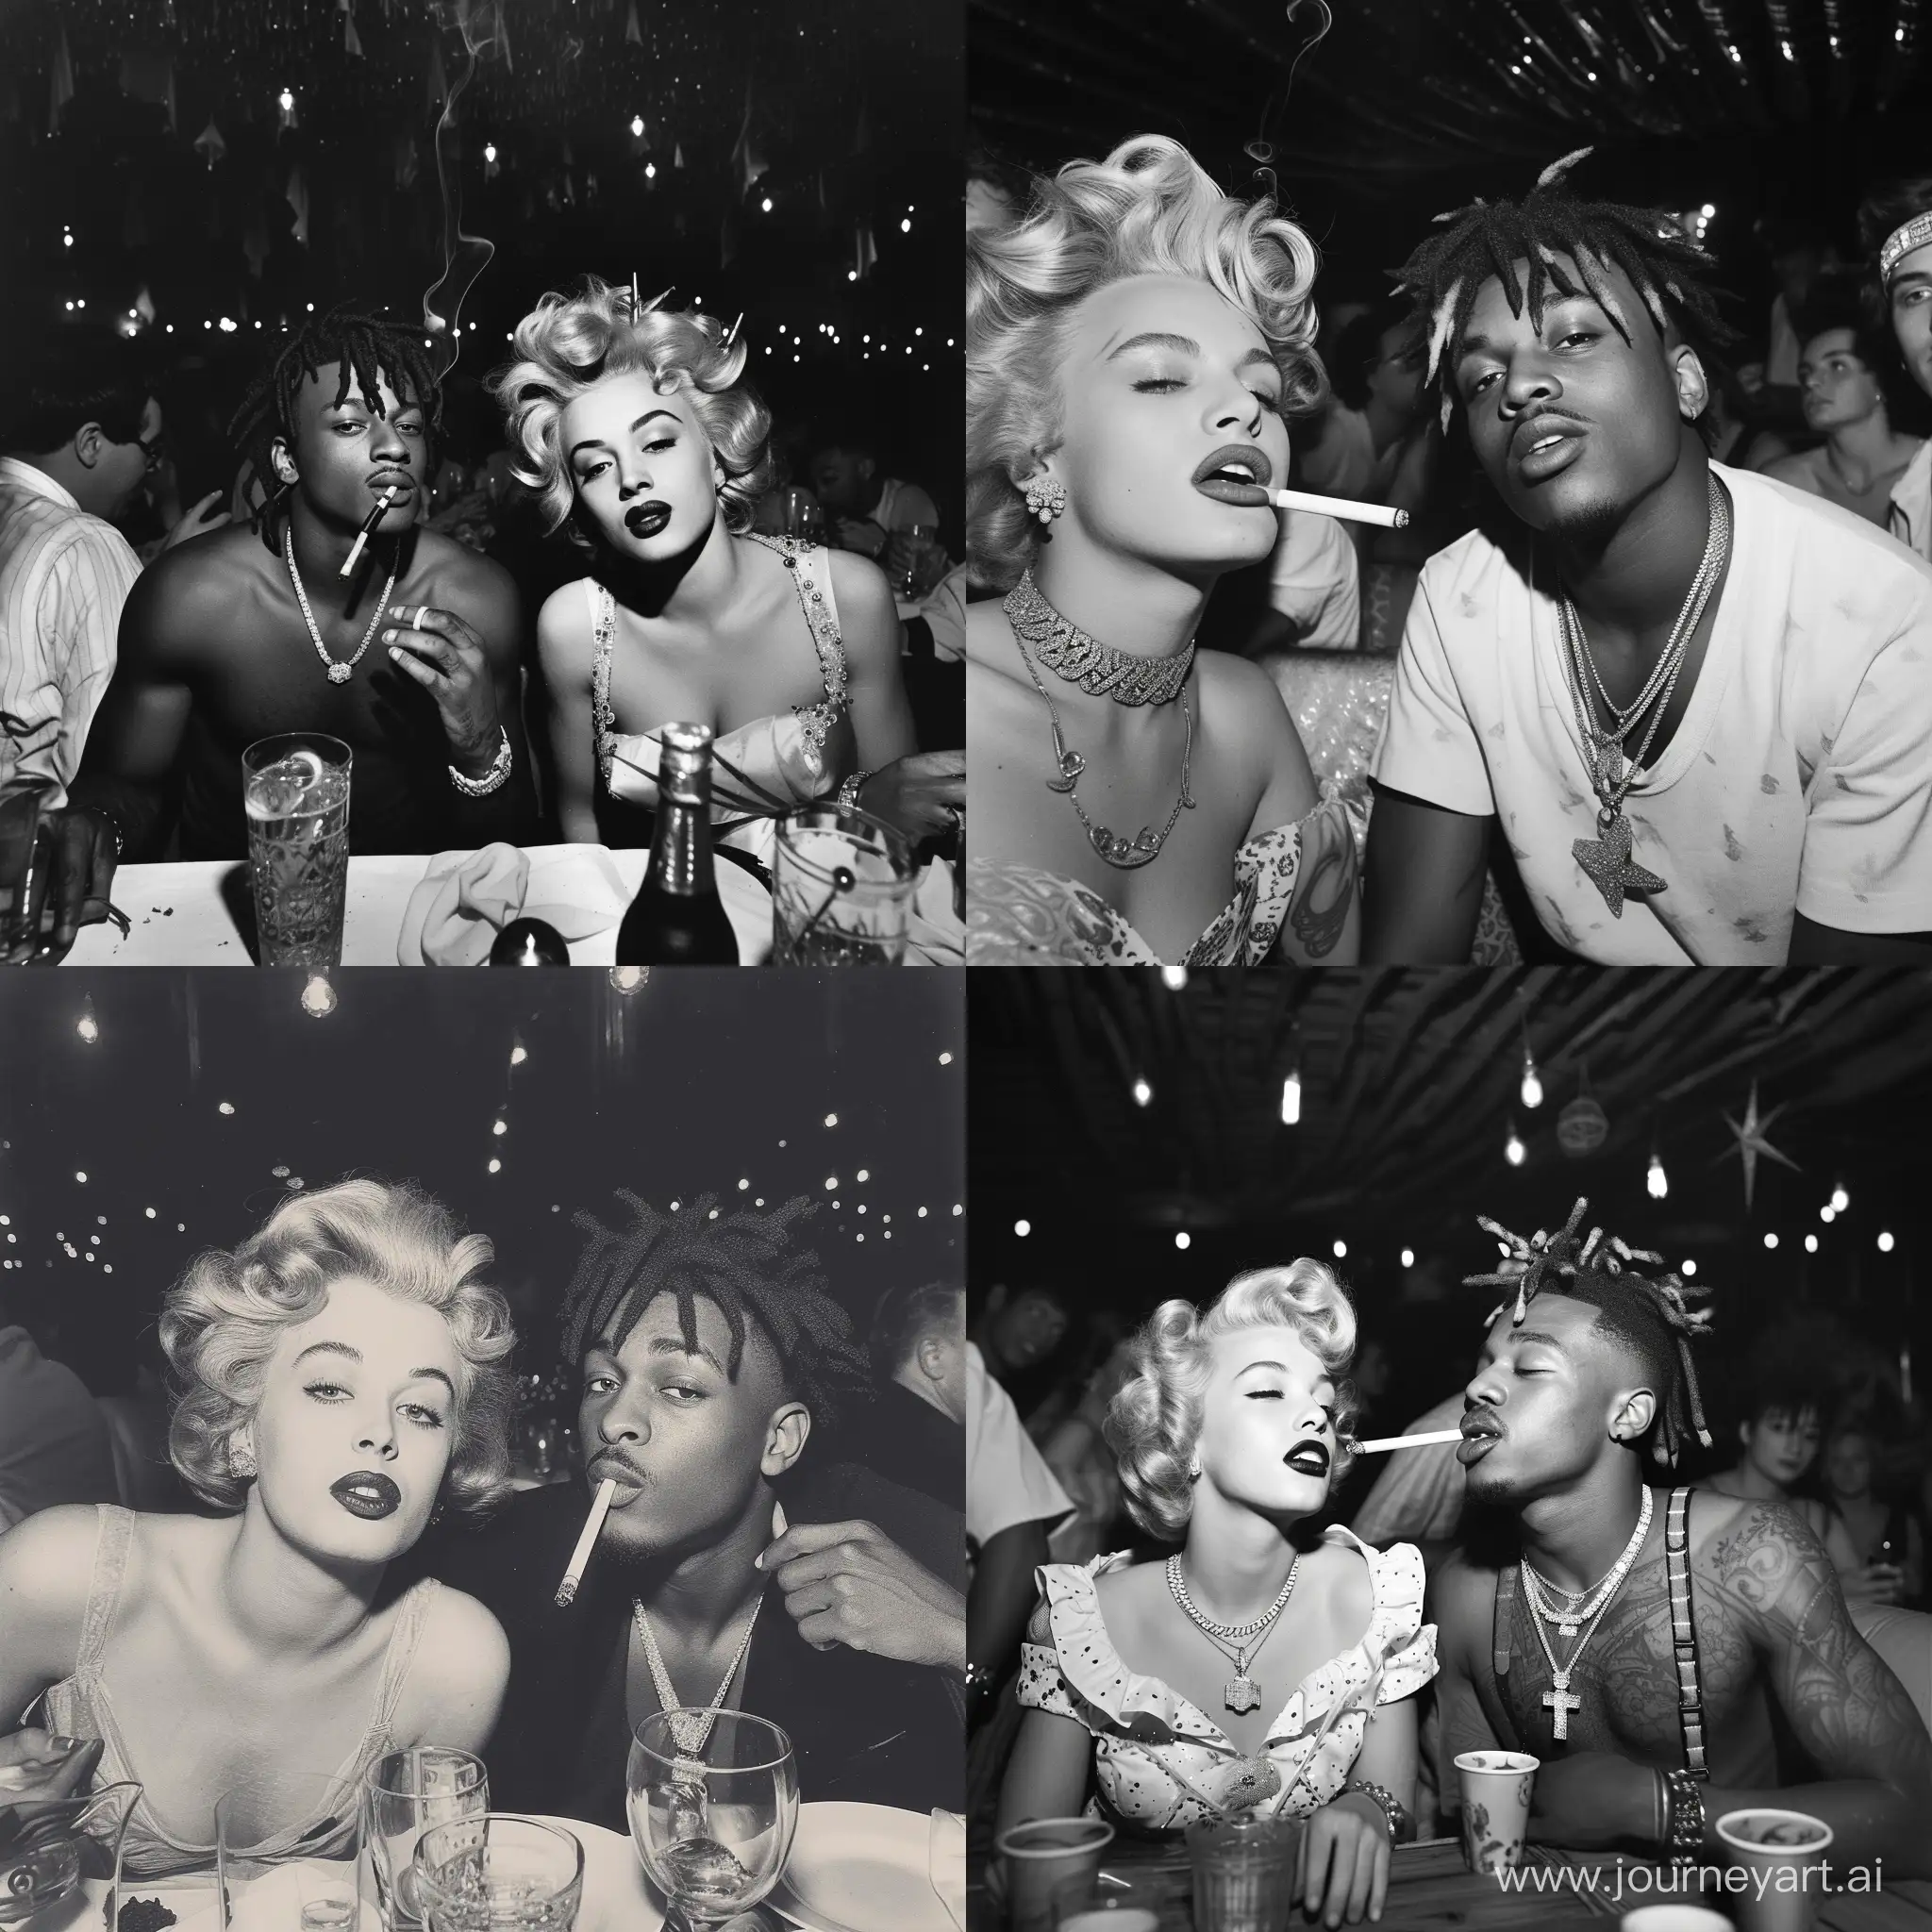 A 1950s Black and White Photograph,of Juice WRLD with Marilyn Monroe,at a celebrity hiuse party smoking.